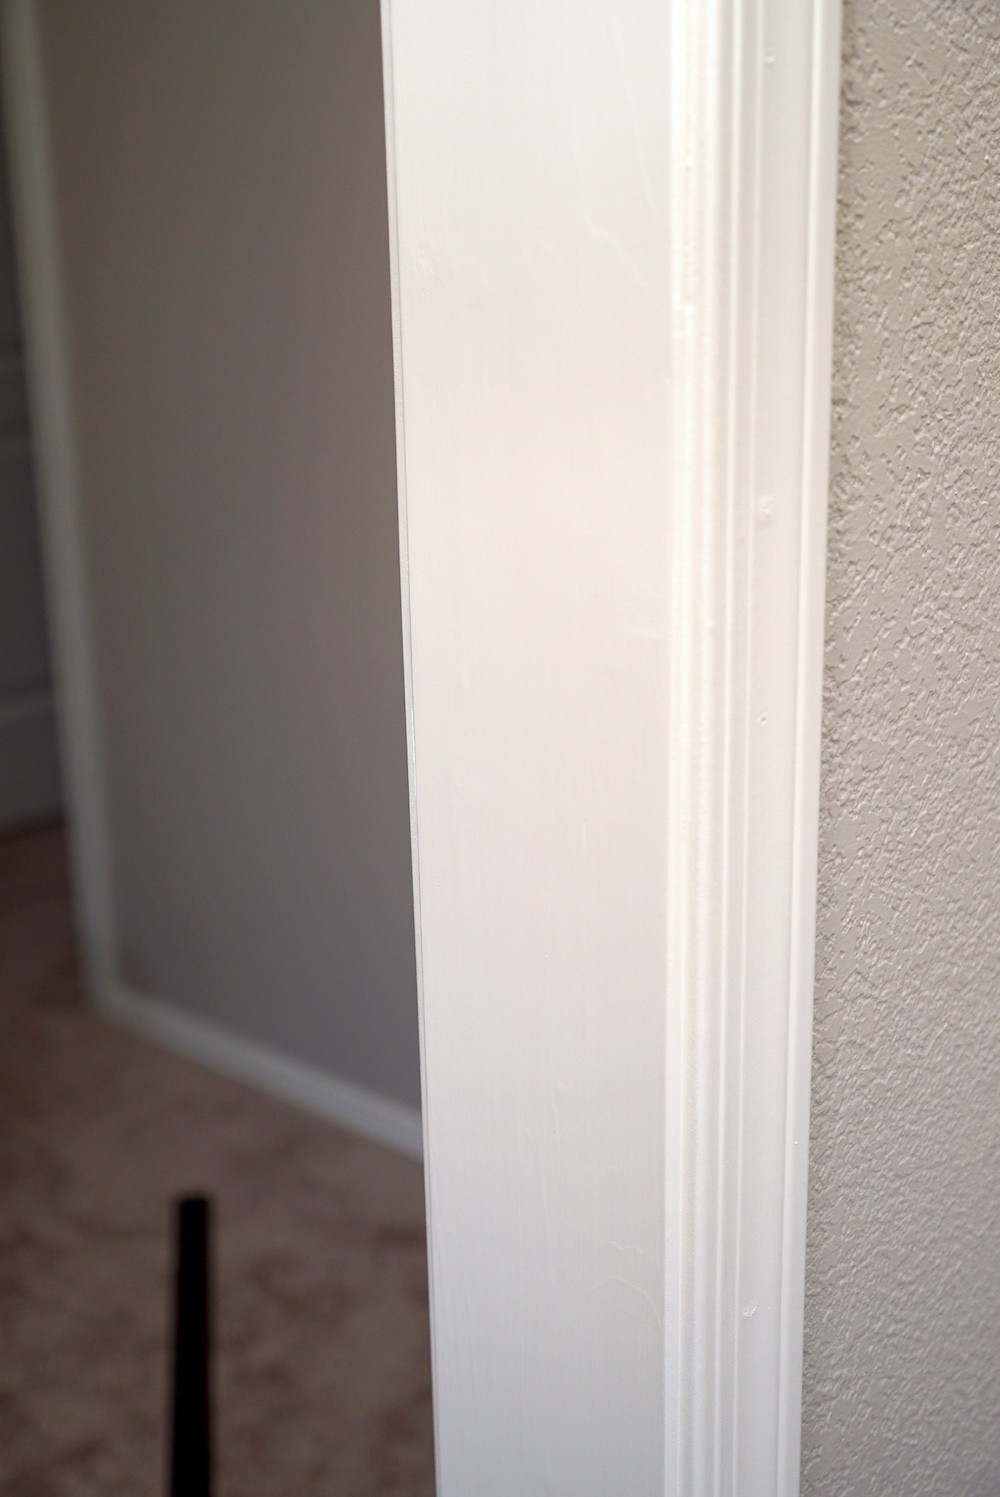 Step 4: Paint the Walkway with Your Trim Color